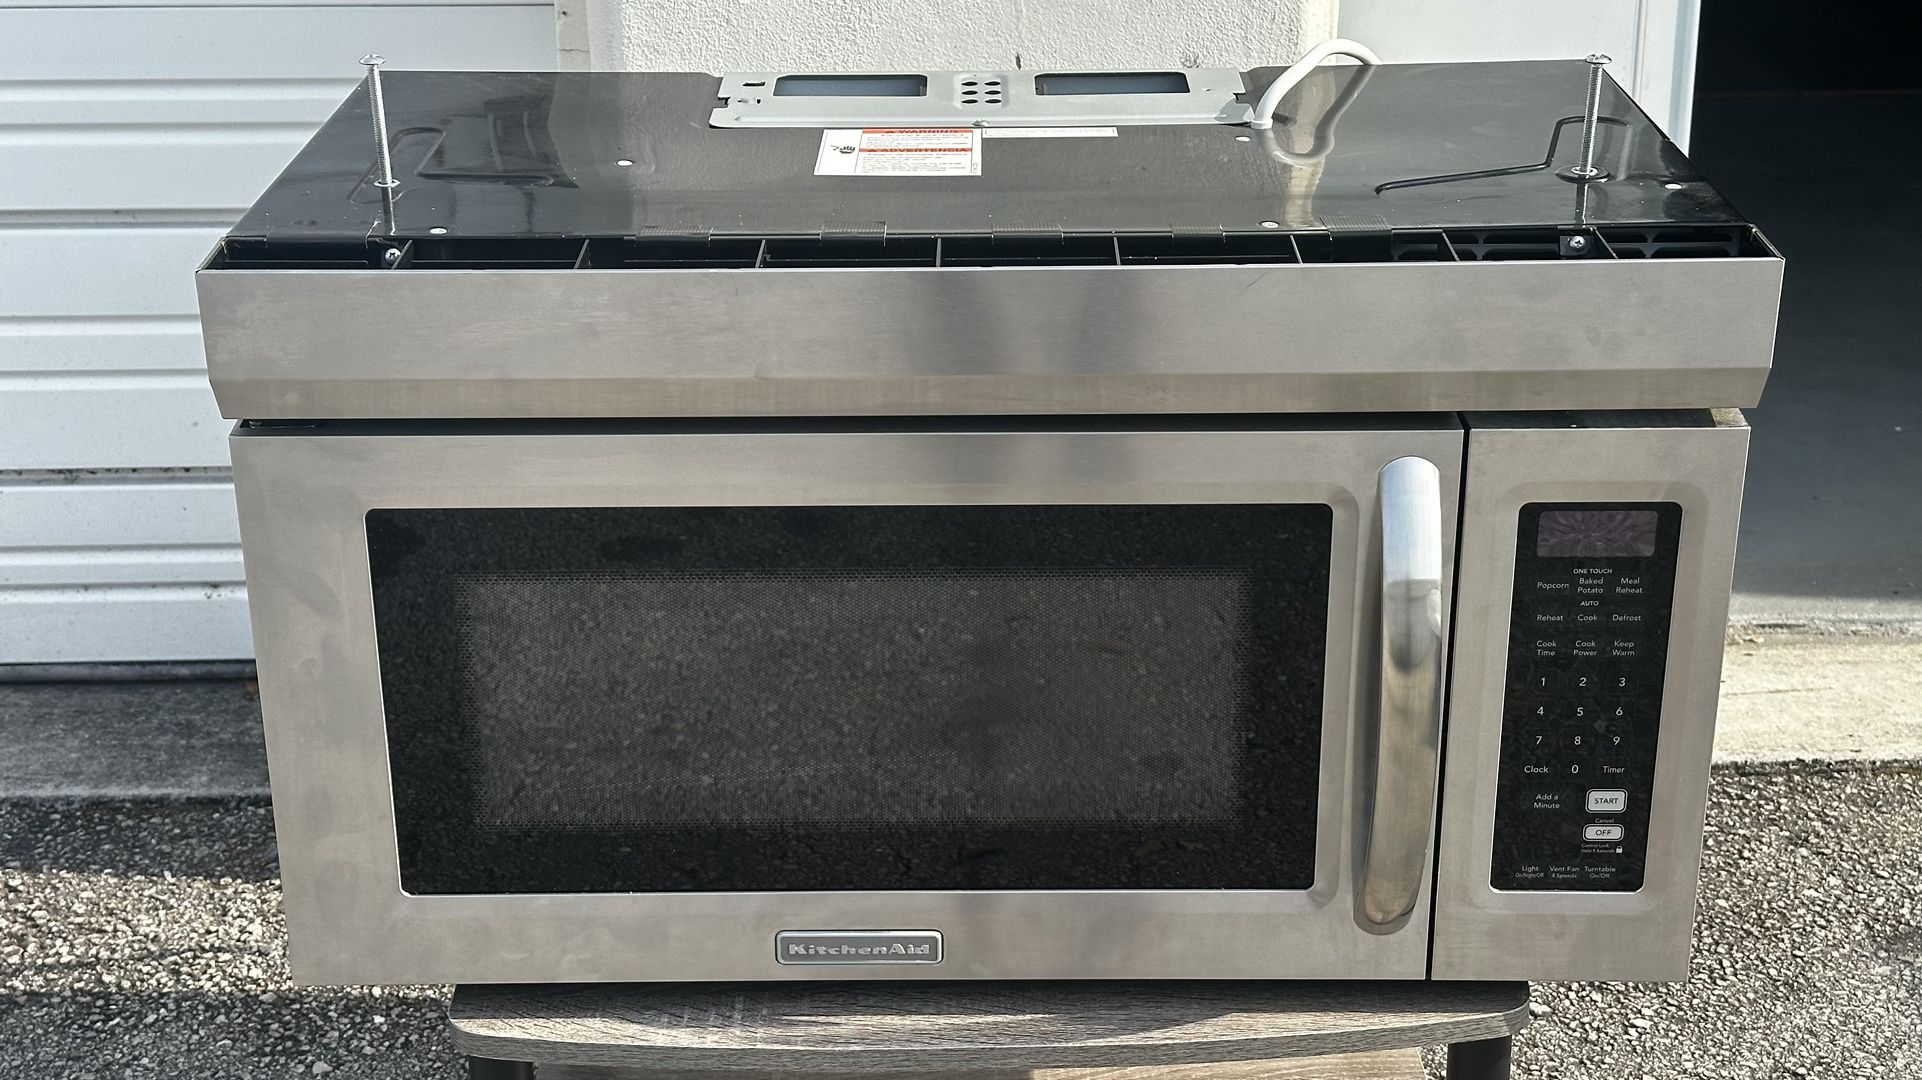 KITCHENAID MICROWAVE 30" 1000-Watt - delivery is negotiable